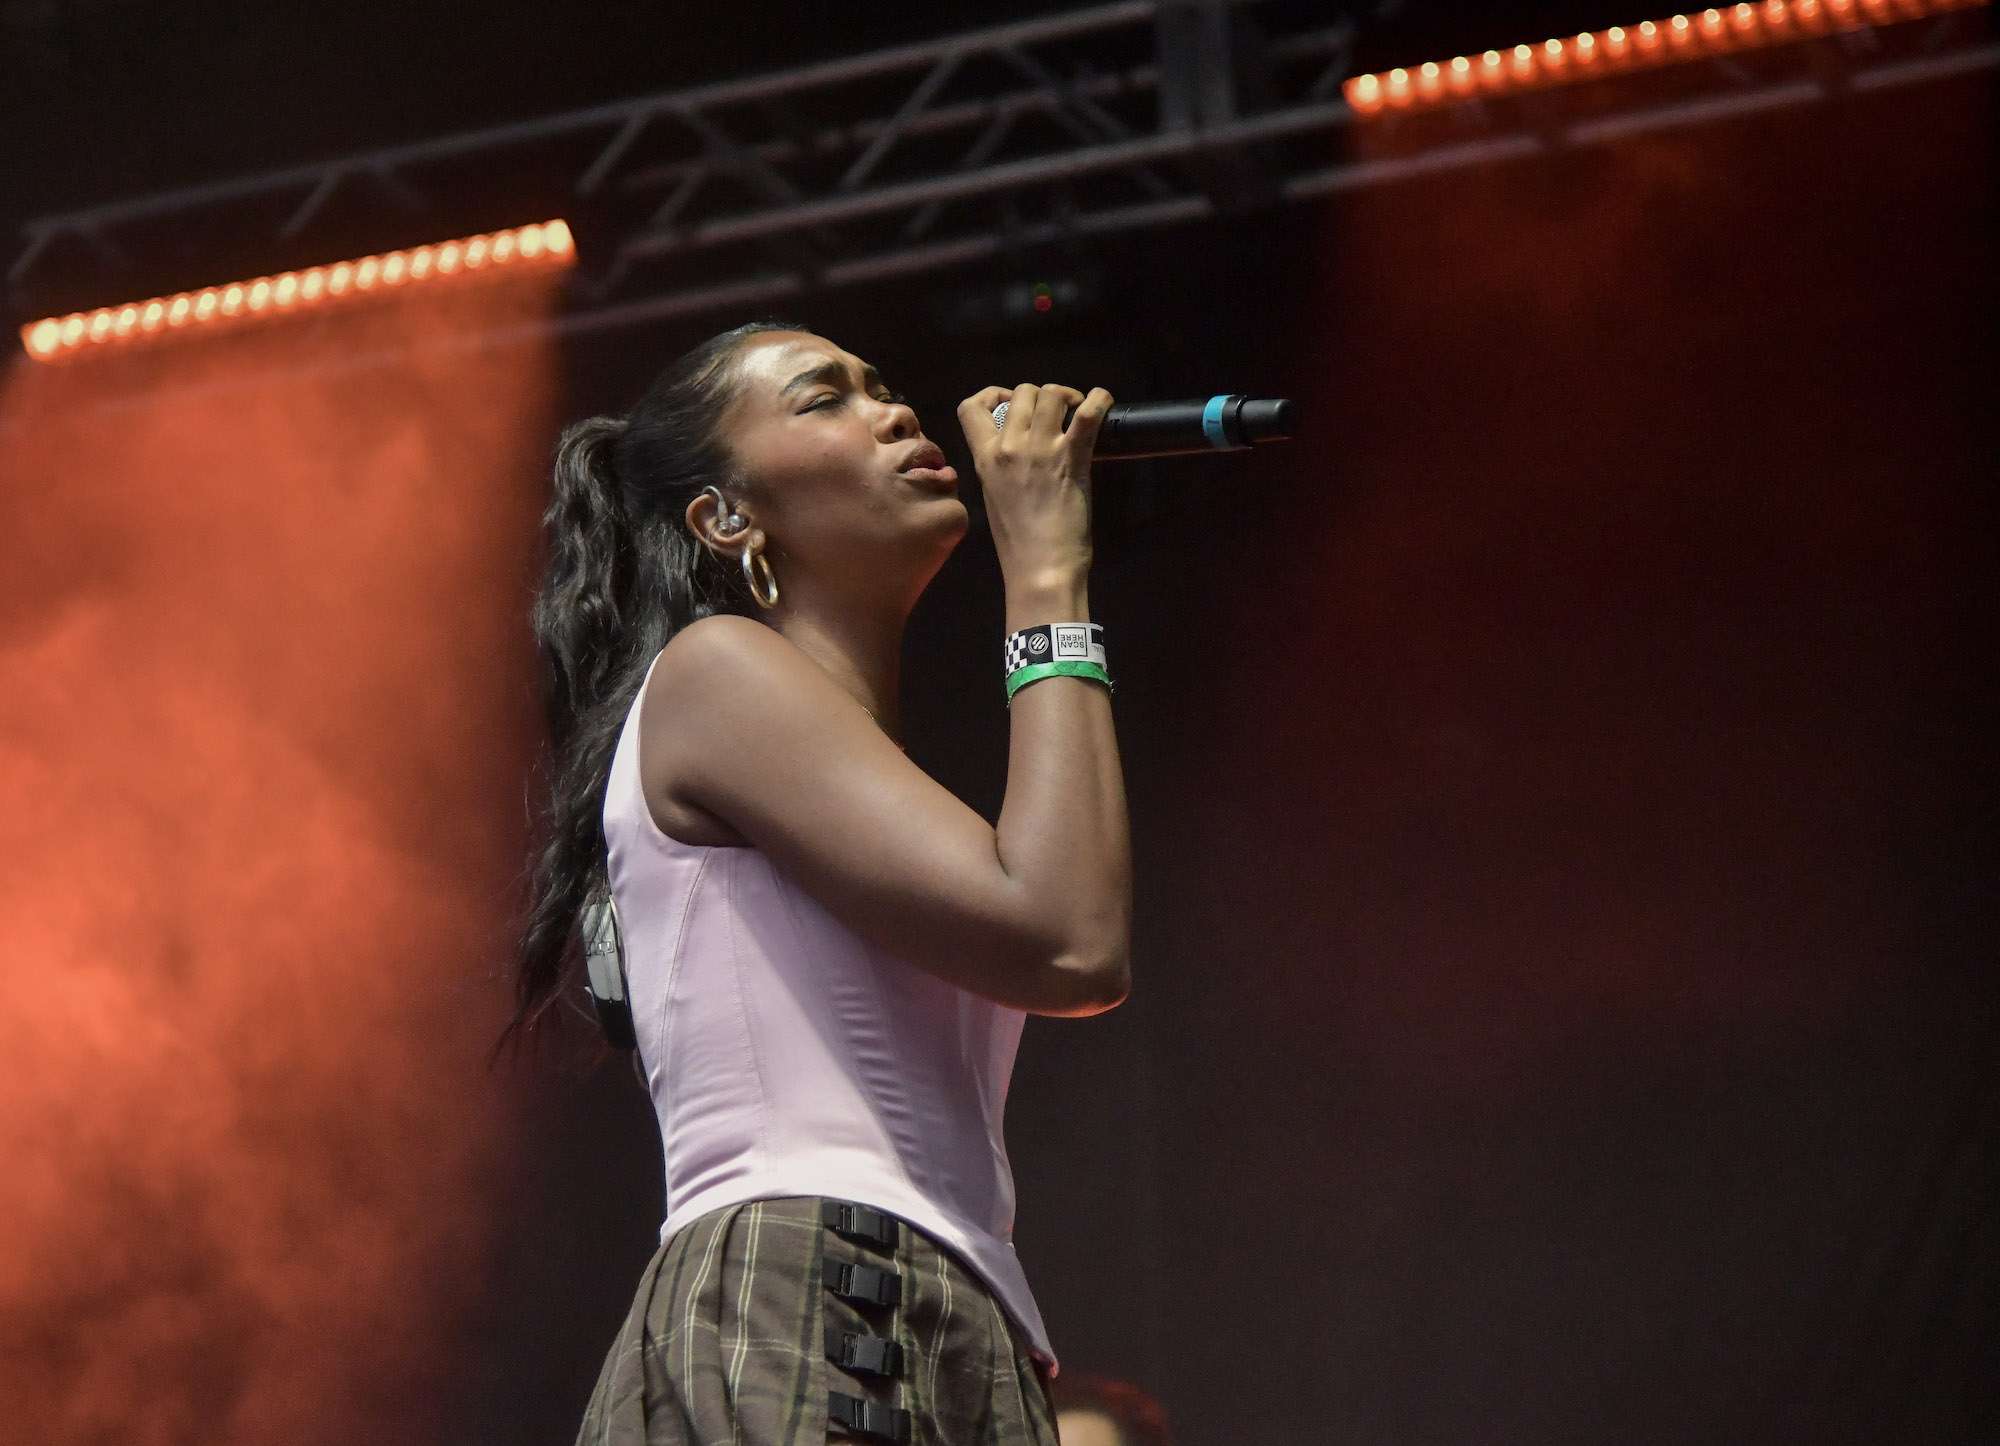 Amber Mark Live At Pitchfork [GALLERY] 3